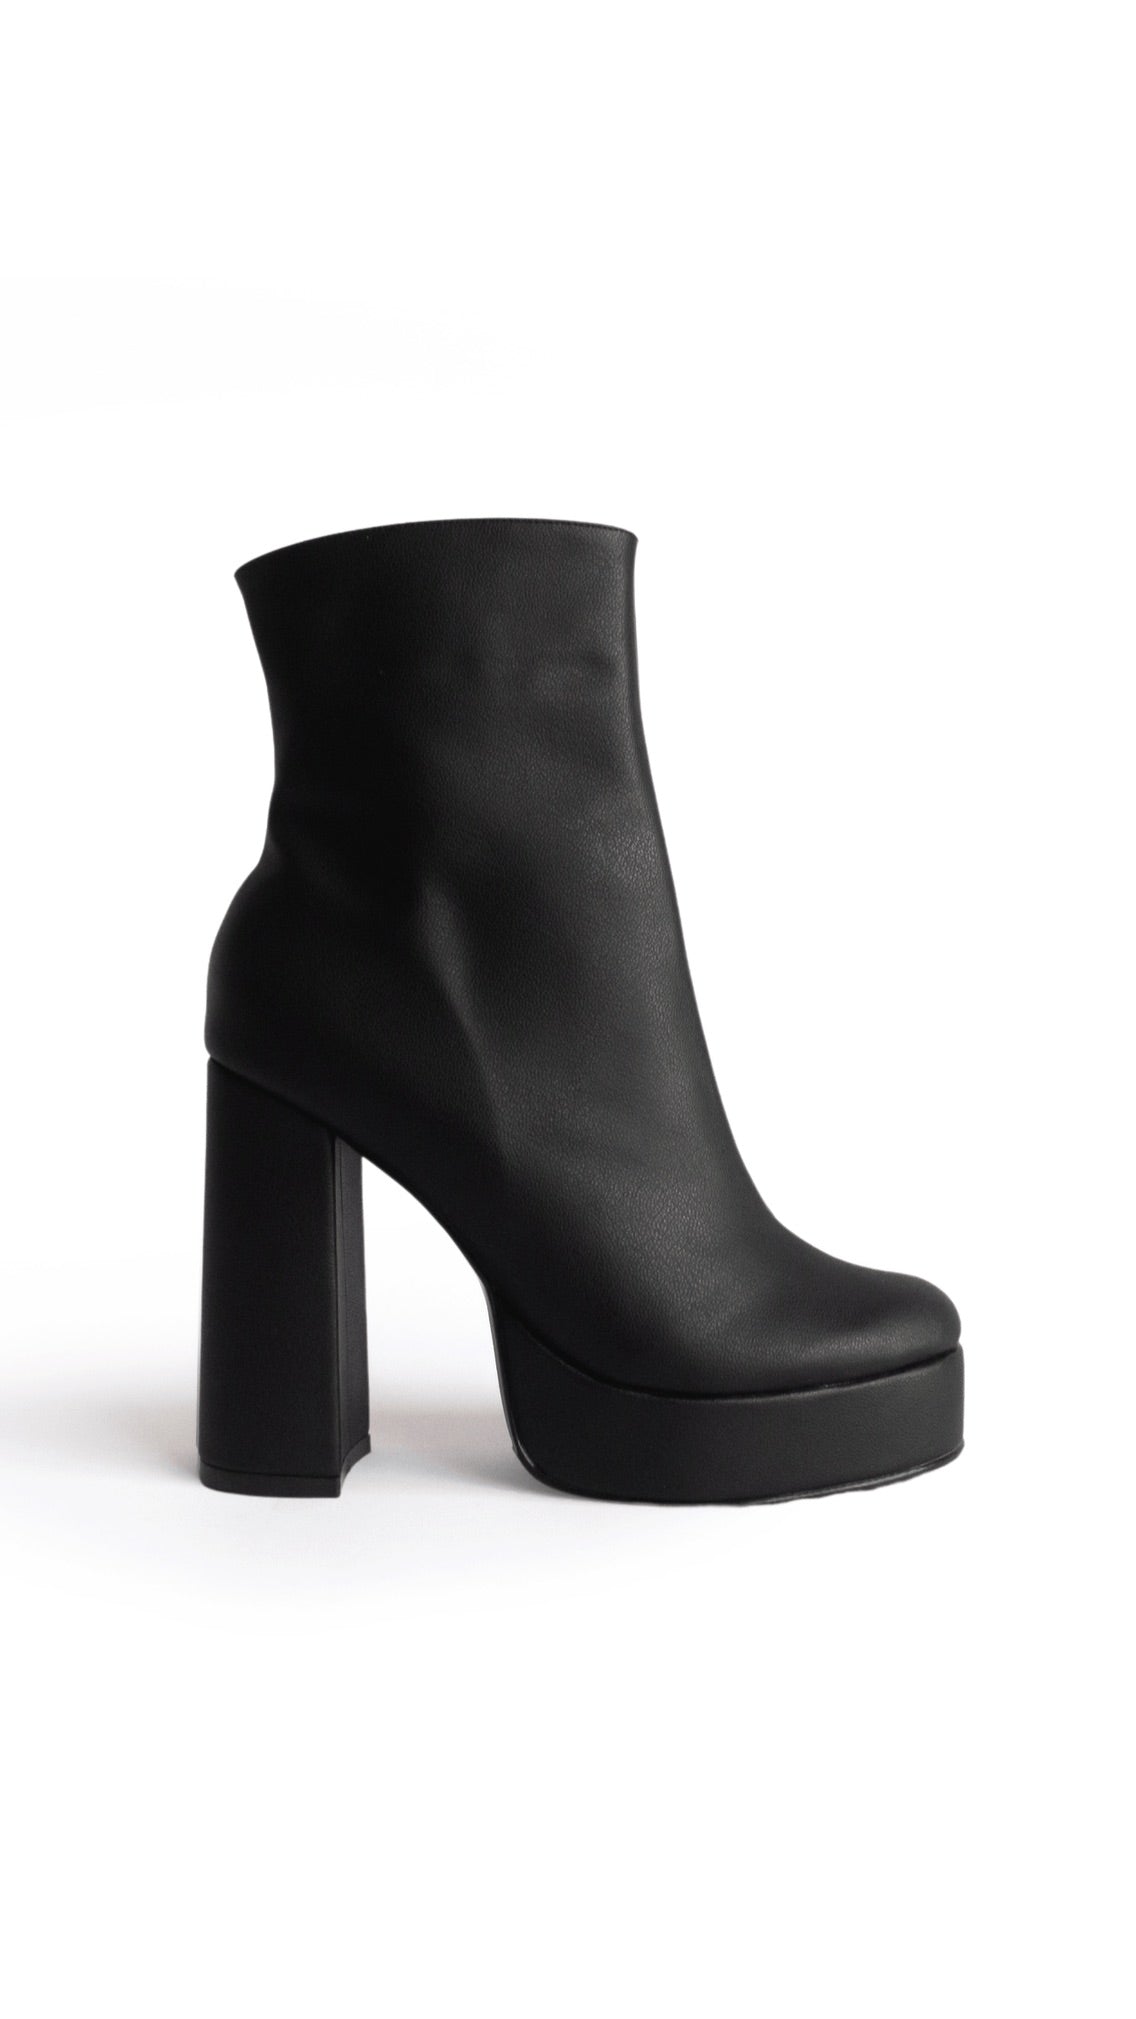 KENDALL BOOTS / NEGRO